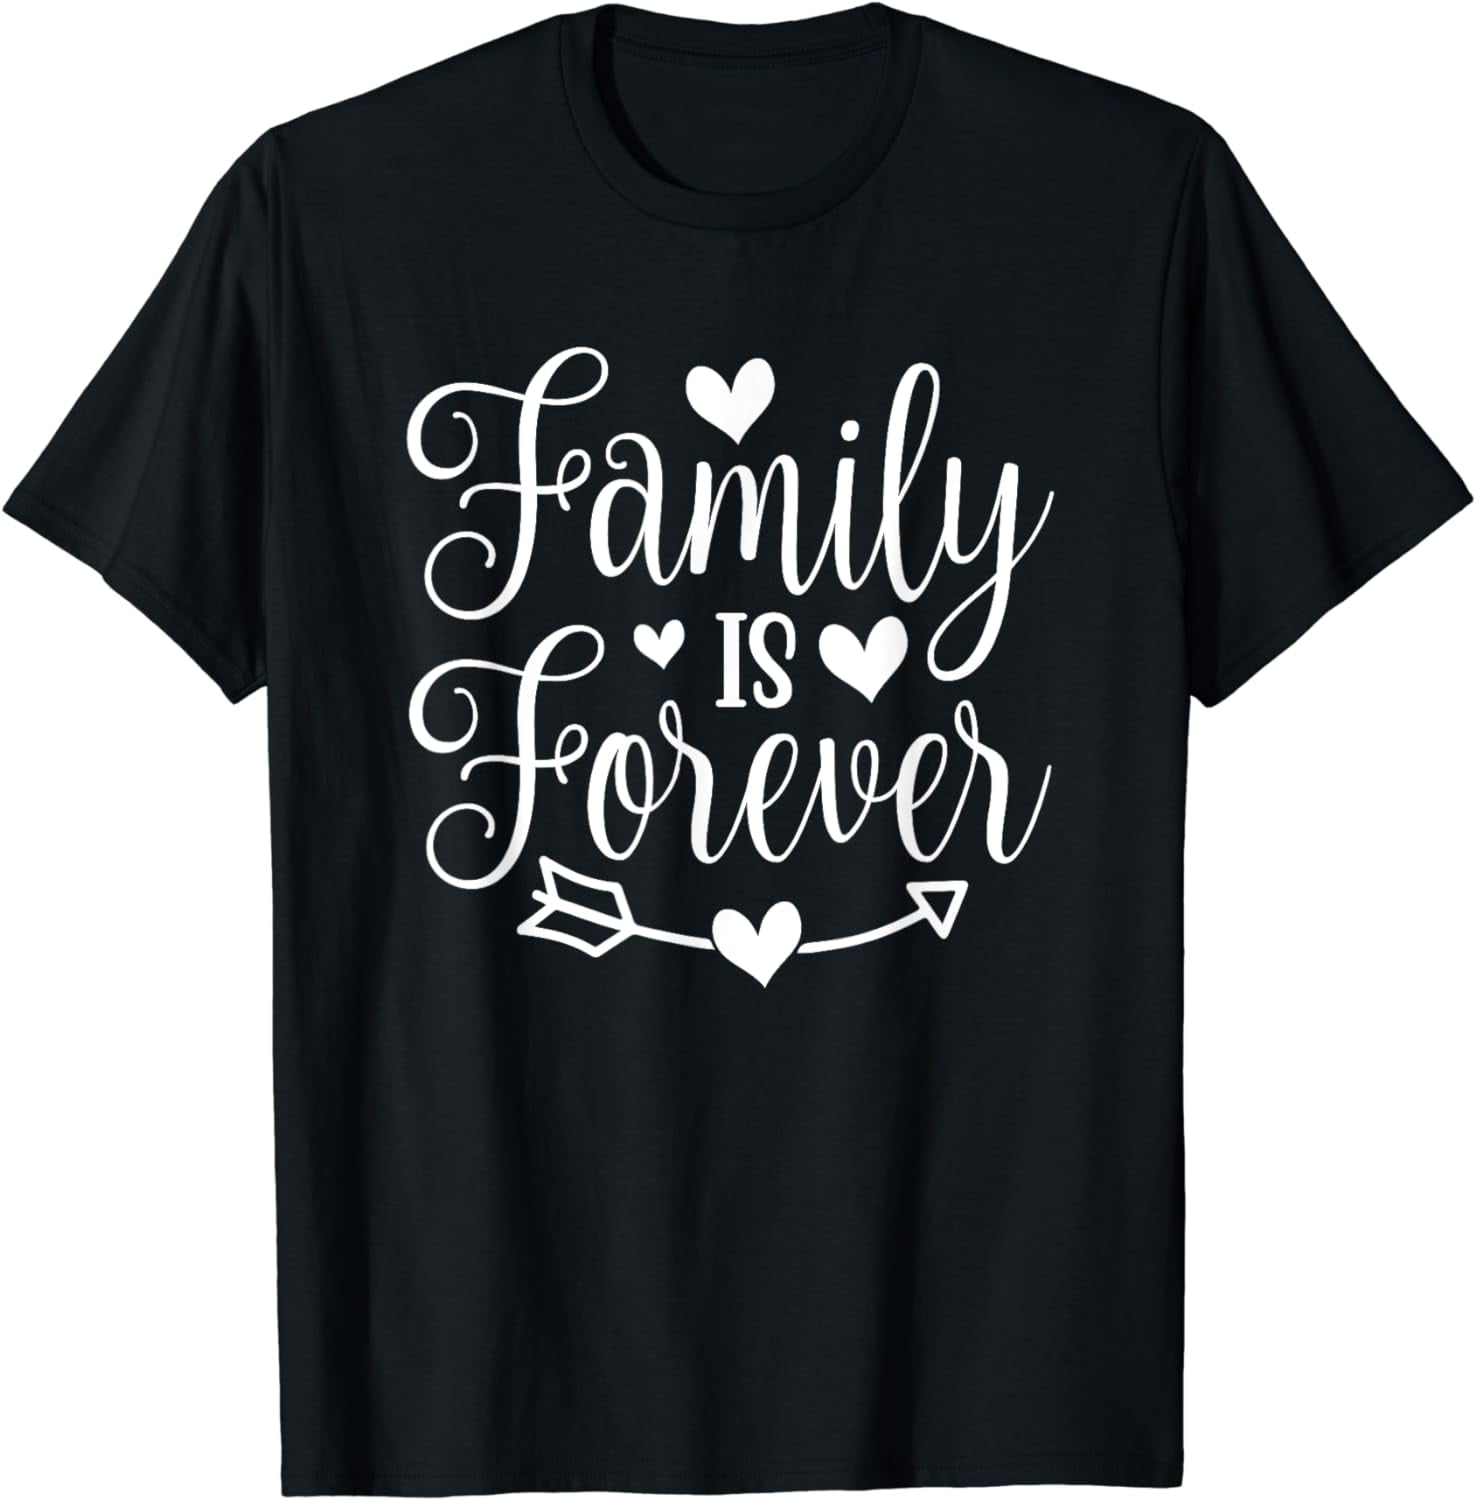 Cute Family Is Everything Families Means Forever Design T-.Shirt ...